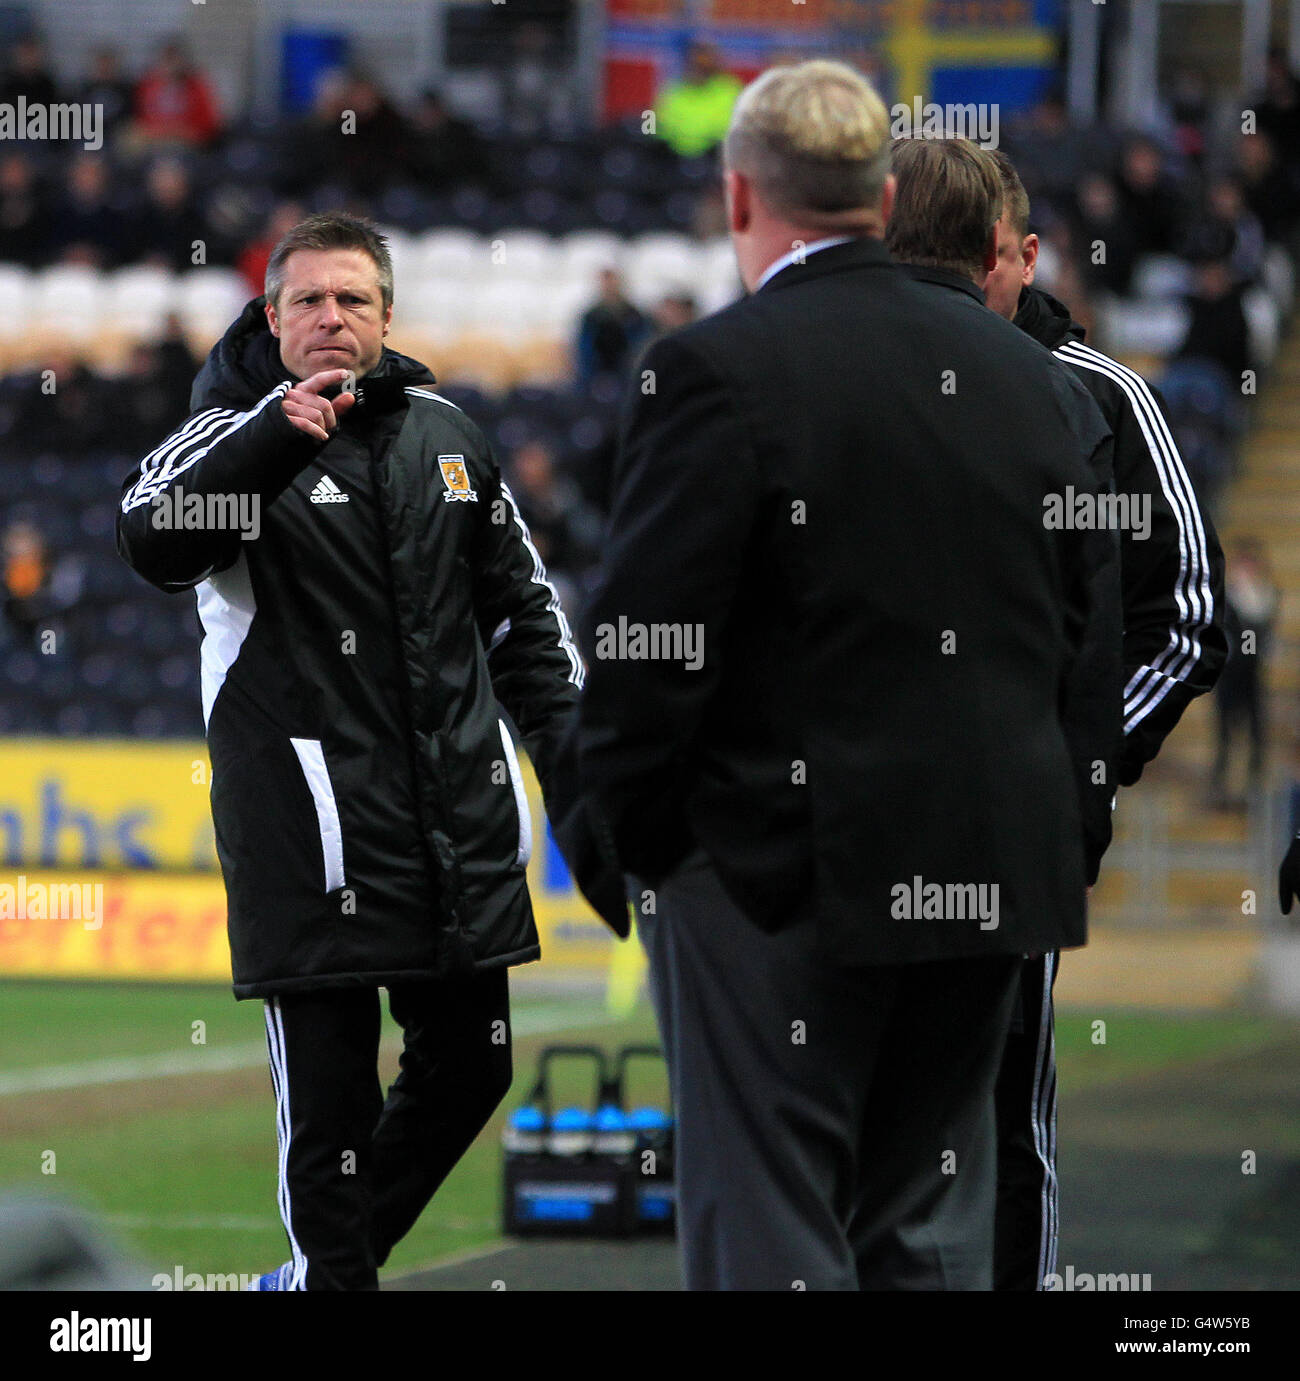 Soccer - FA Cup - Fourth Round - Hull City v Crawley Town - KC Stadium. Hull City's Nick Barmby and Crawley Town's manager Steve Evans have heated words in the dug outs Stock Photo